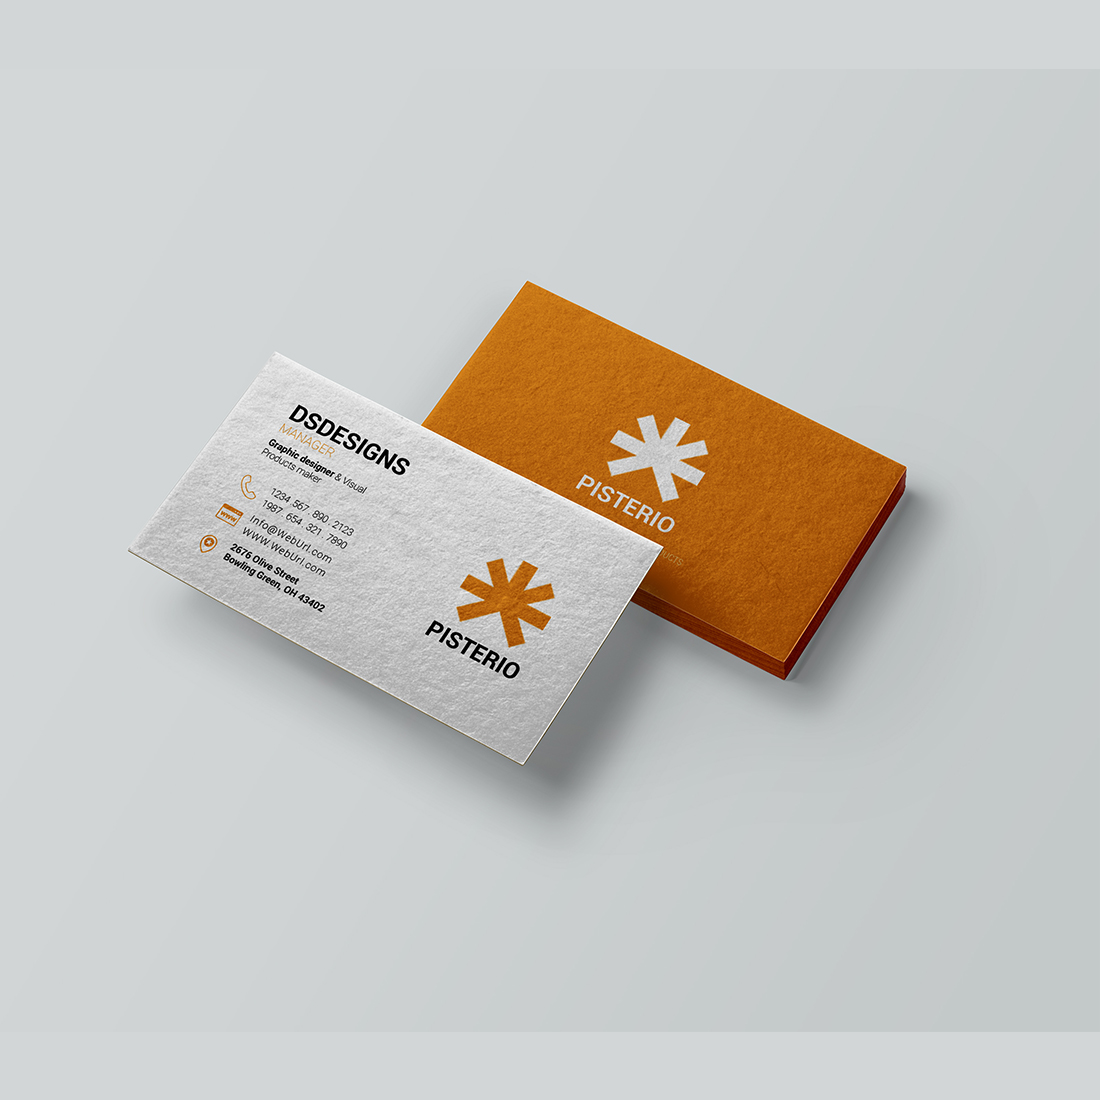 Simple and professional business card design in just 5$ preview image.